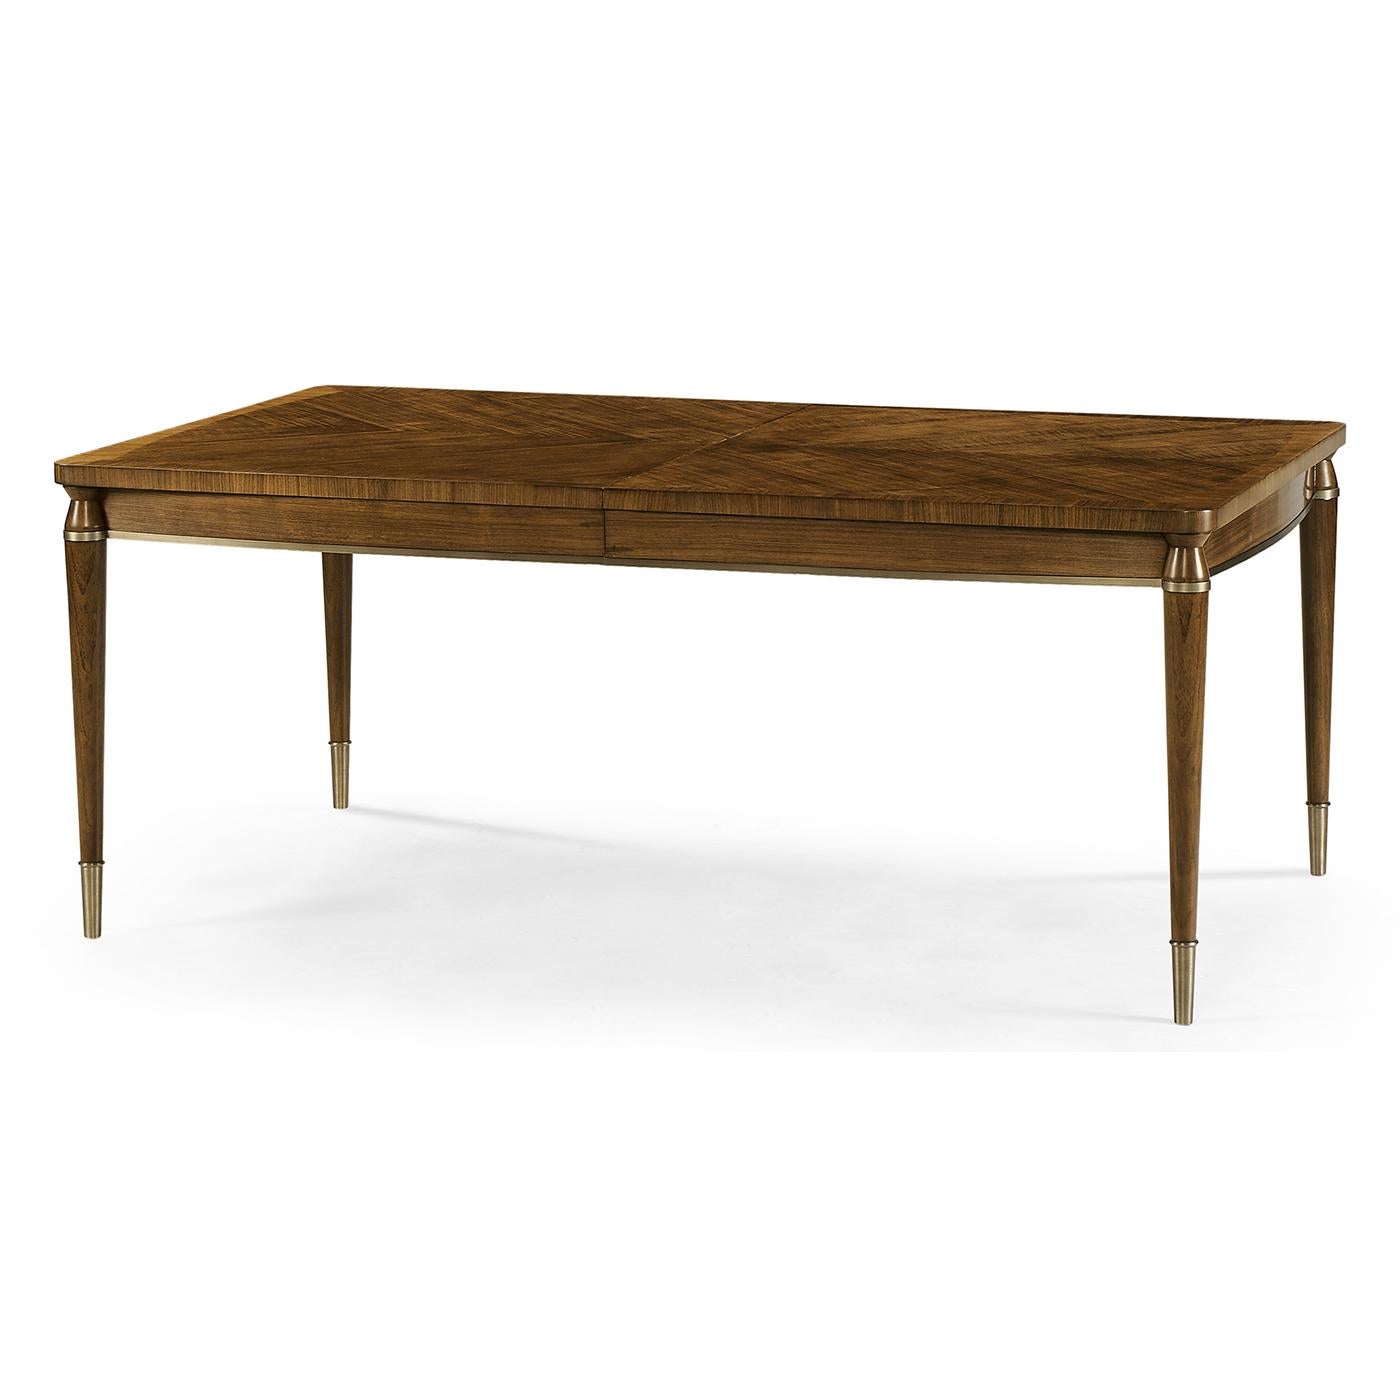 Vietnamese Mid-Century Modern Style Extending Dining Table For Sale